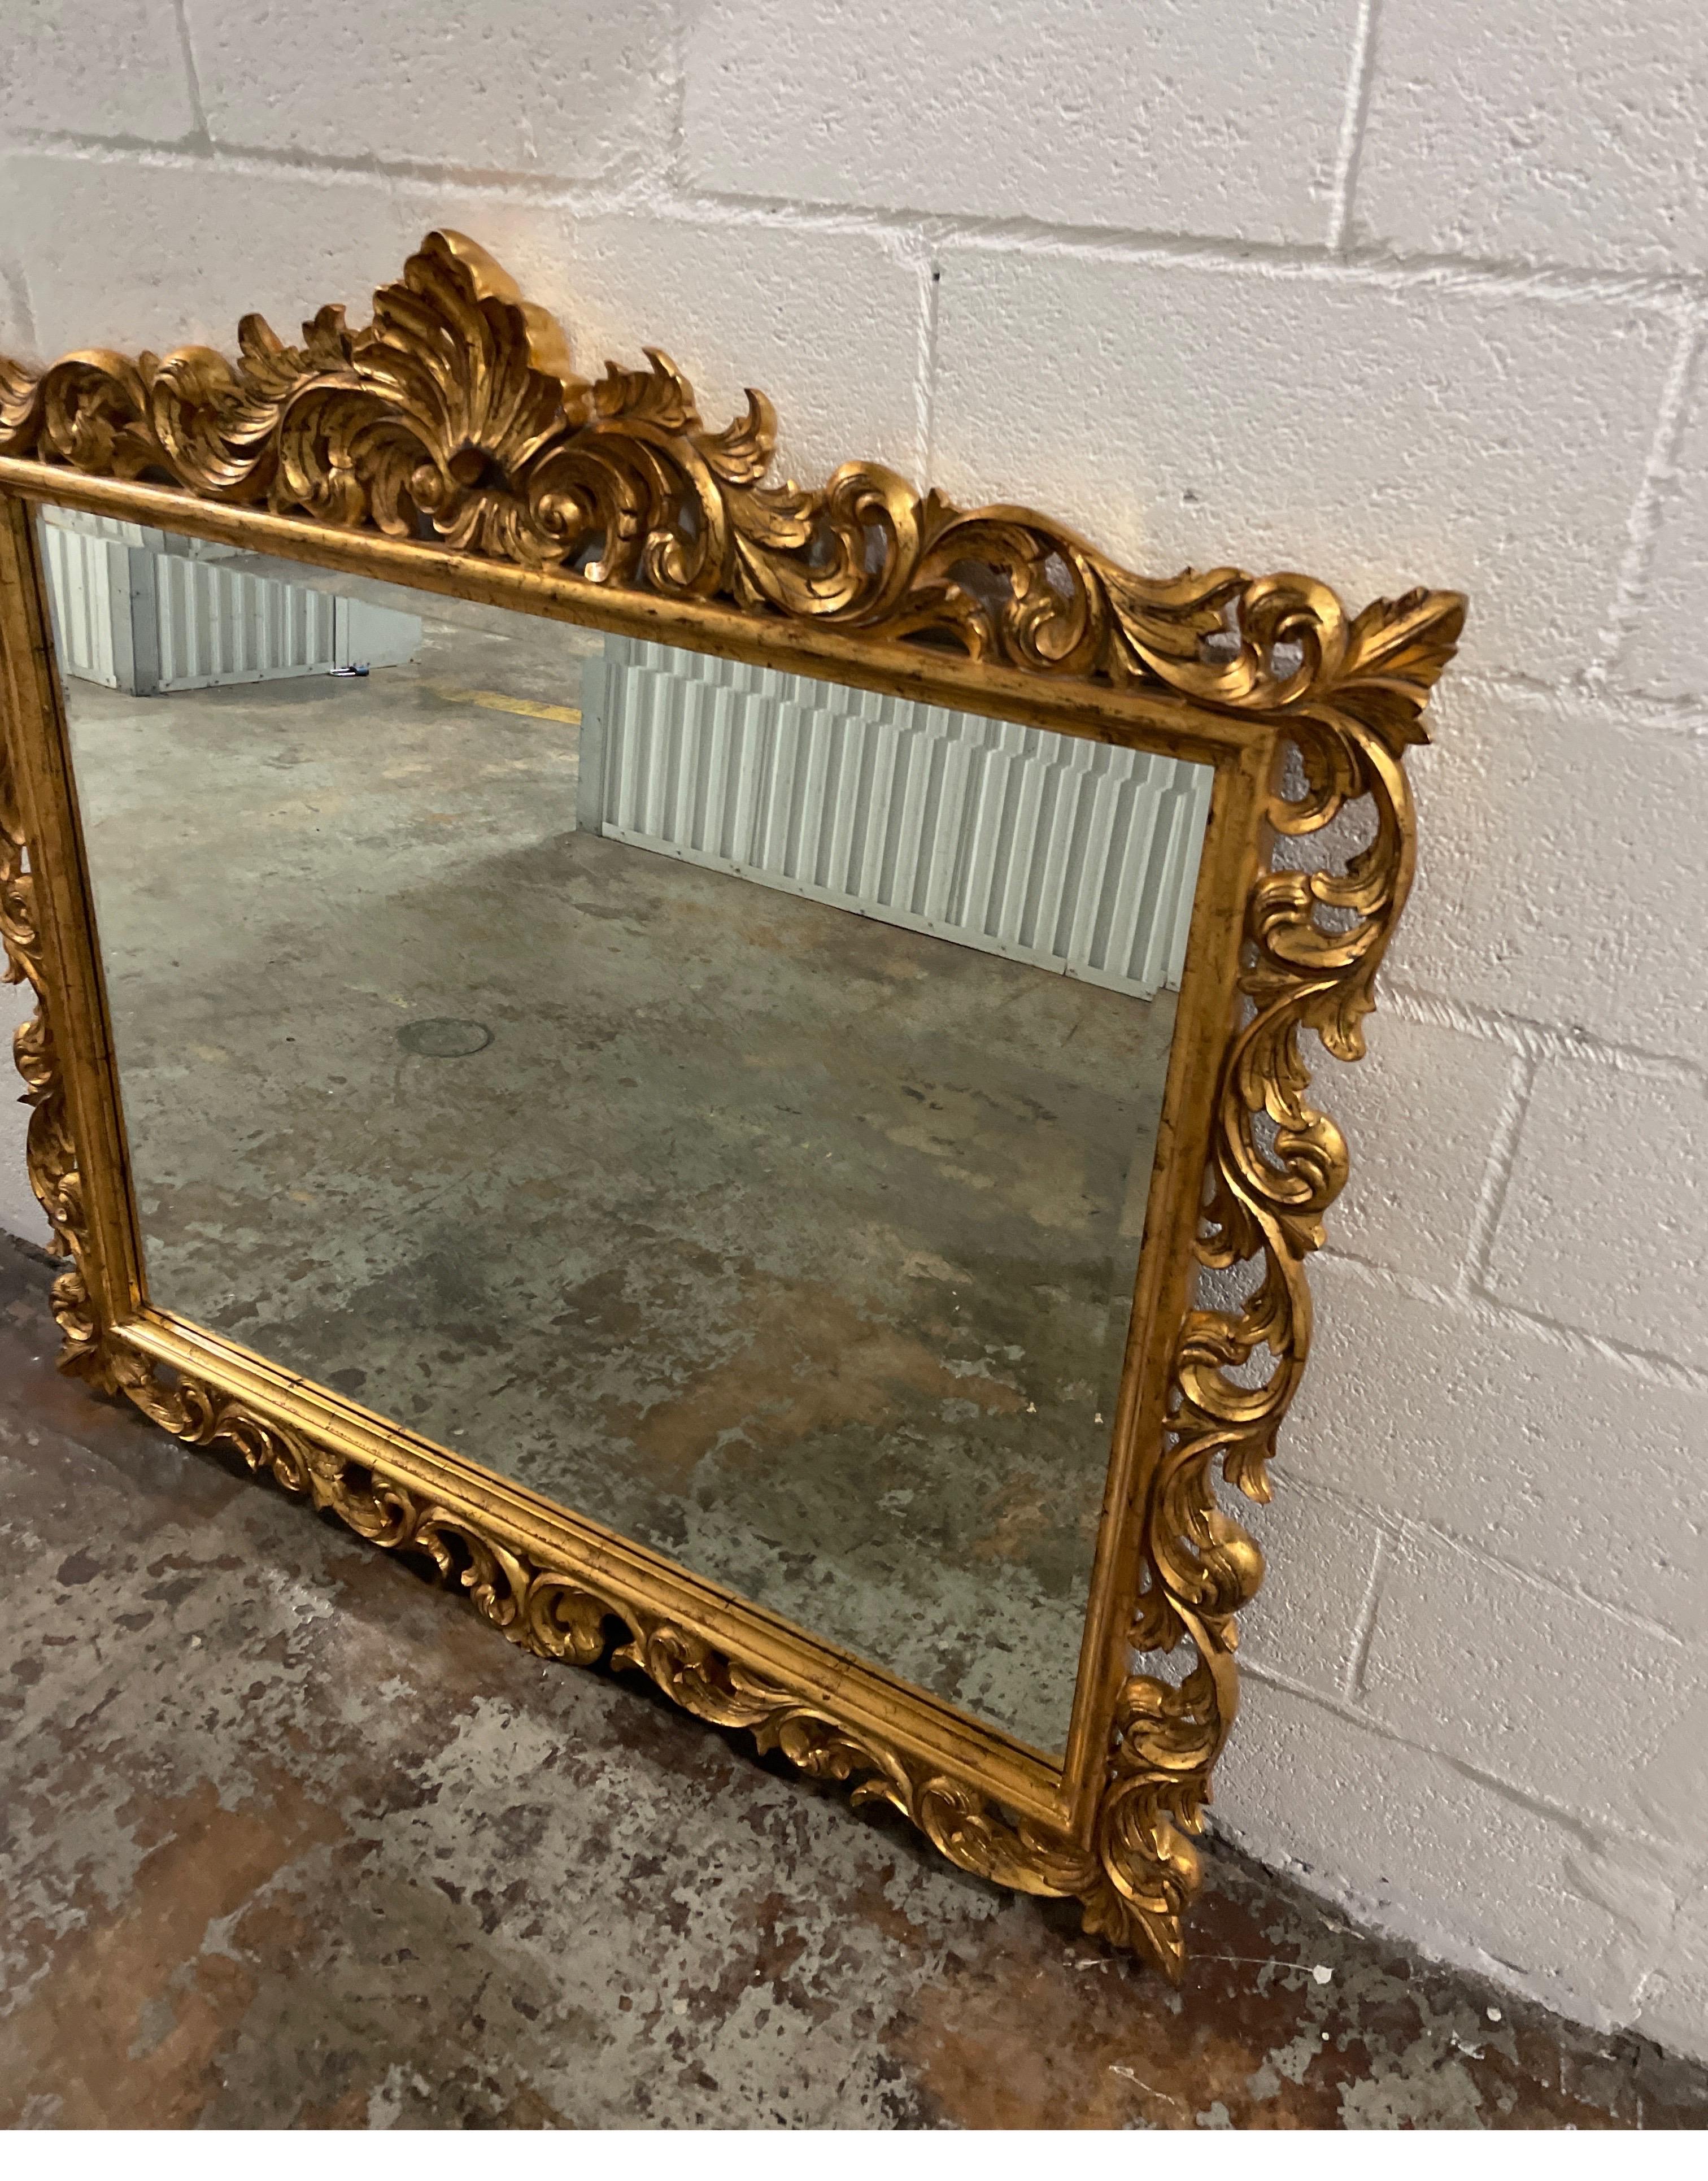 Hand carved & gilded over mantel mirror by Harrison & Gil for Dauphine Mirror Co. This beautiful gilded baroque mirror is topped with a fleur de lys.